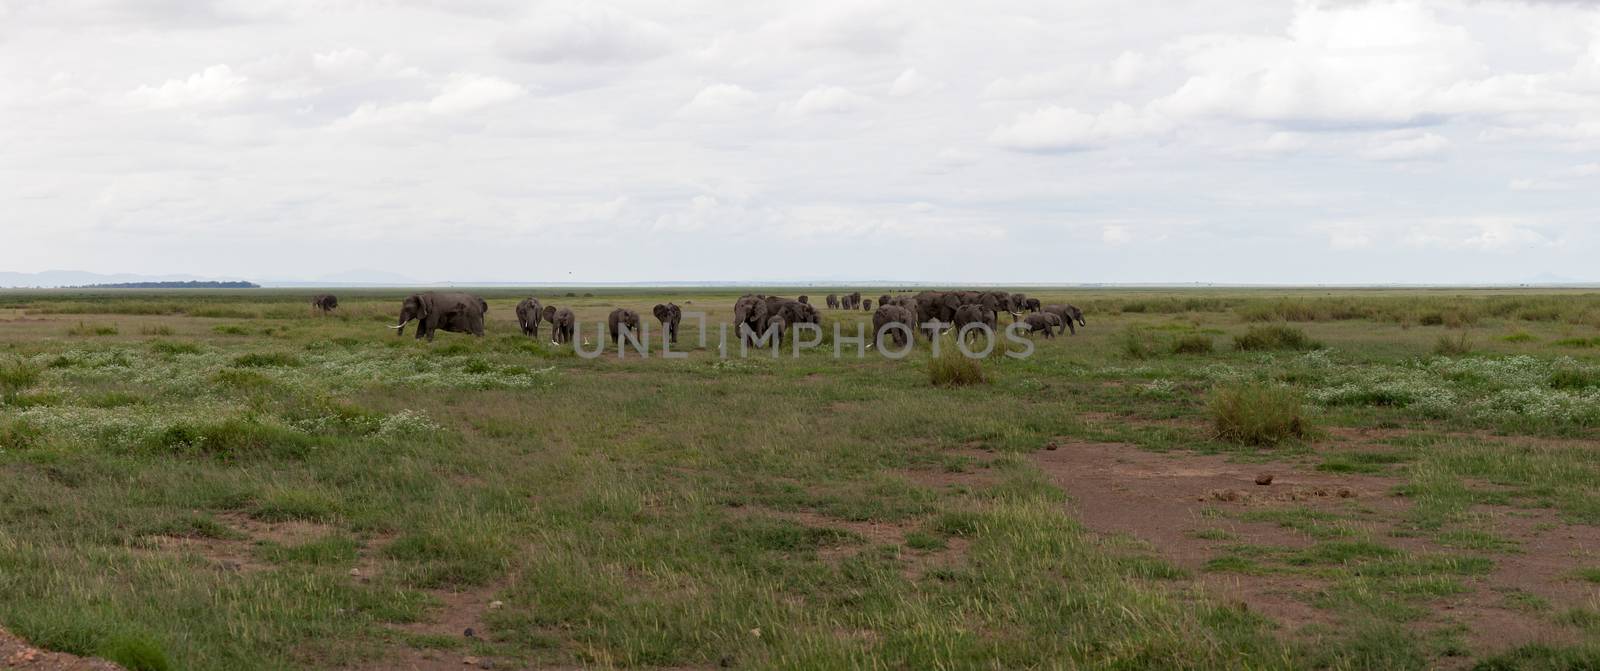 A lot of elephants are grassing in the grassland in the savannah